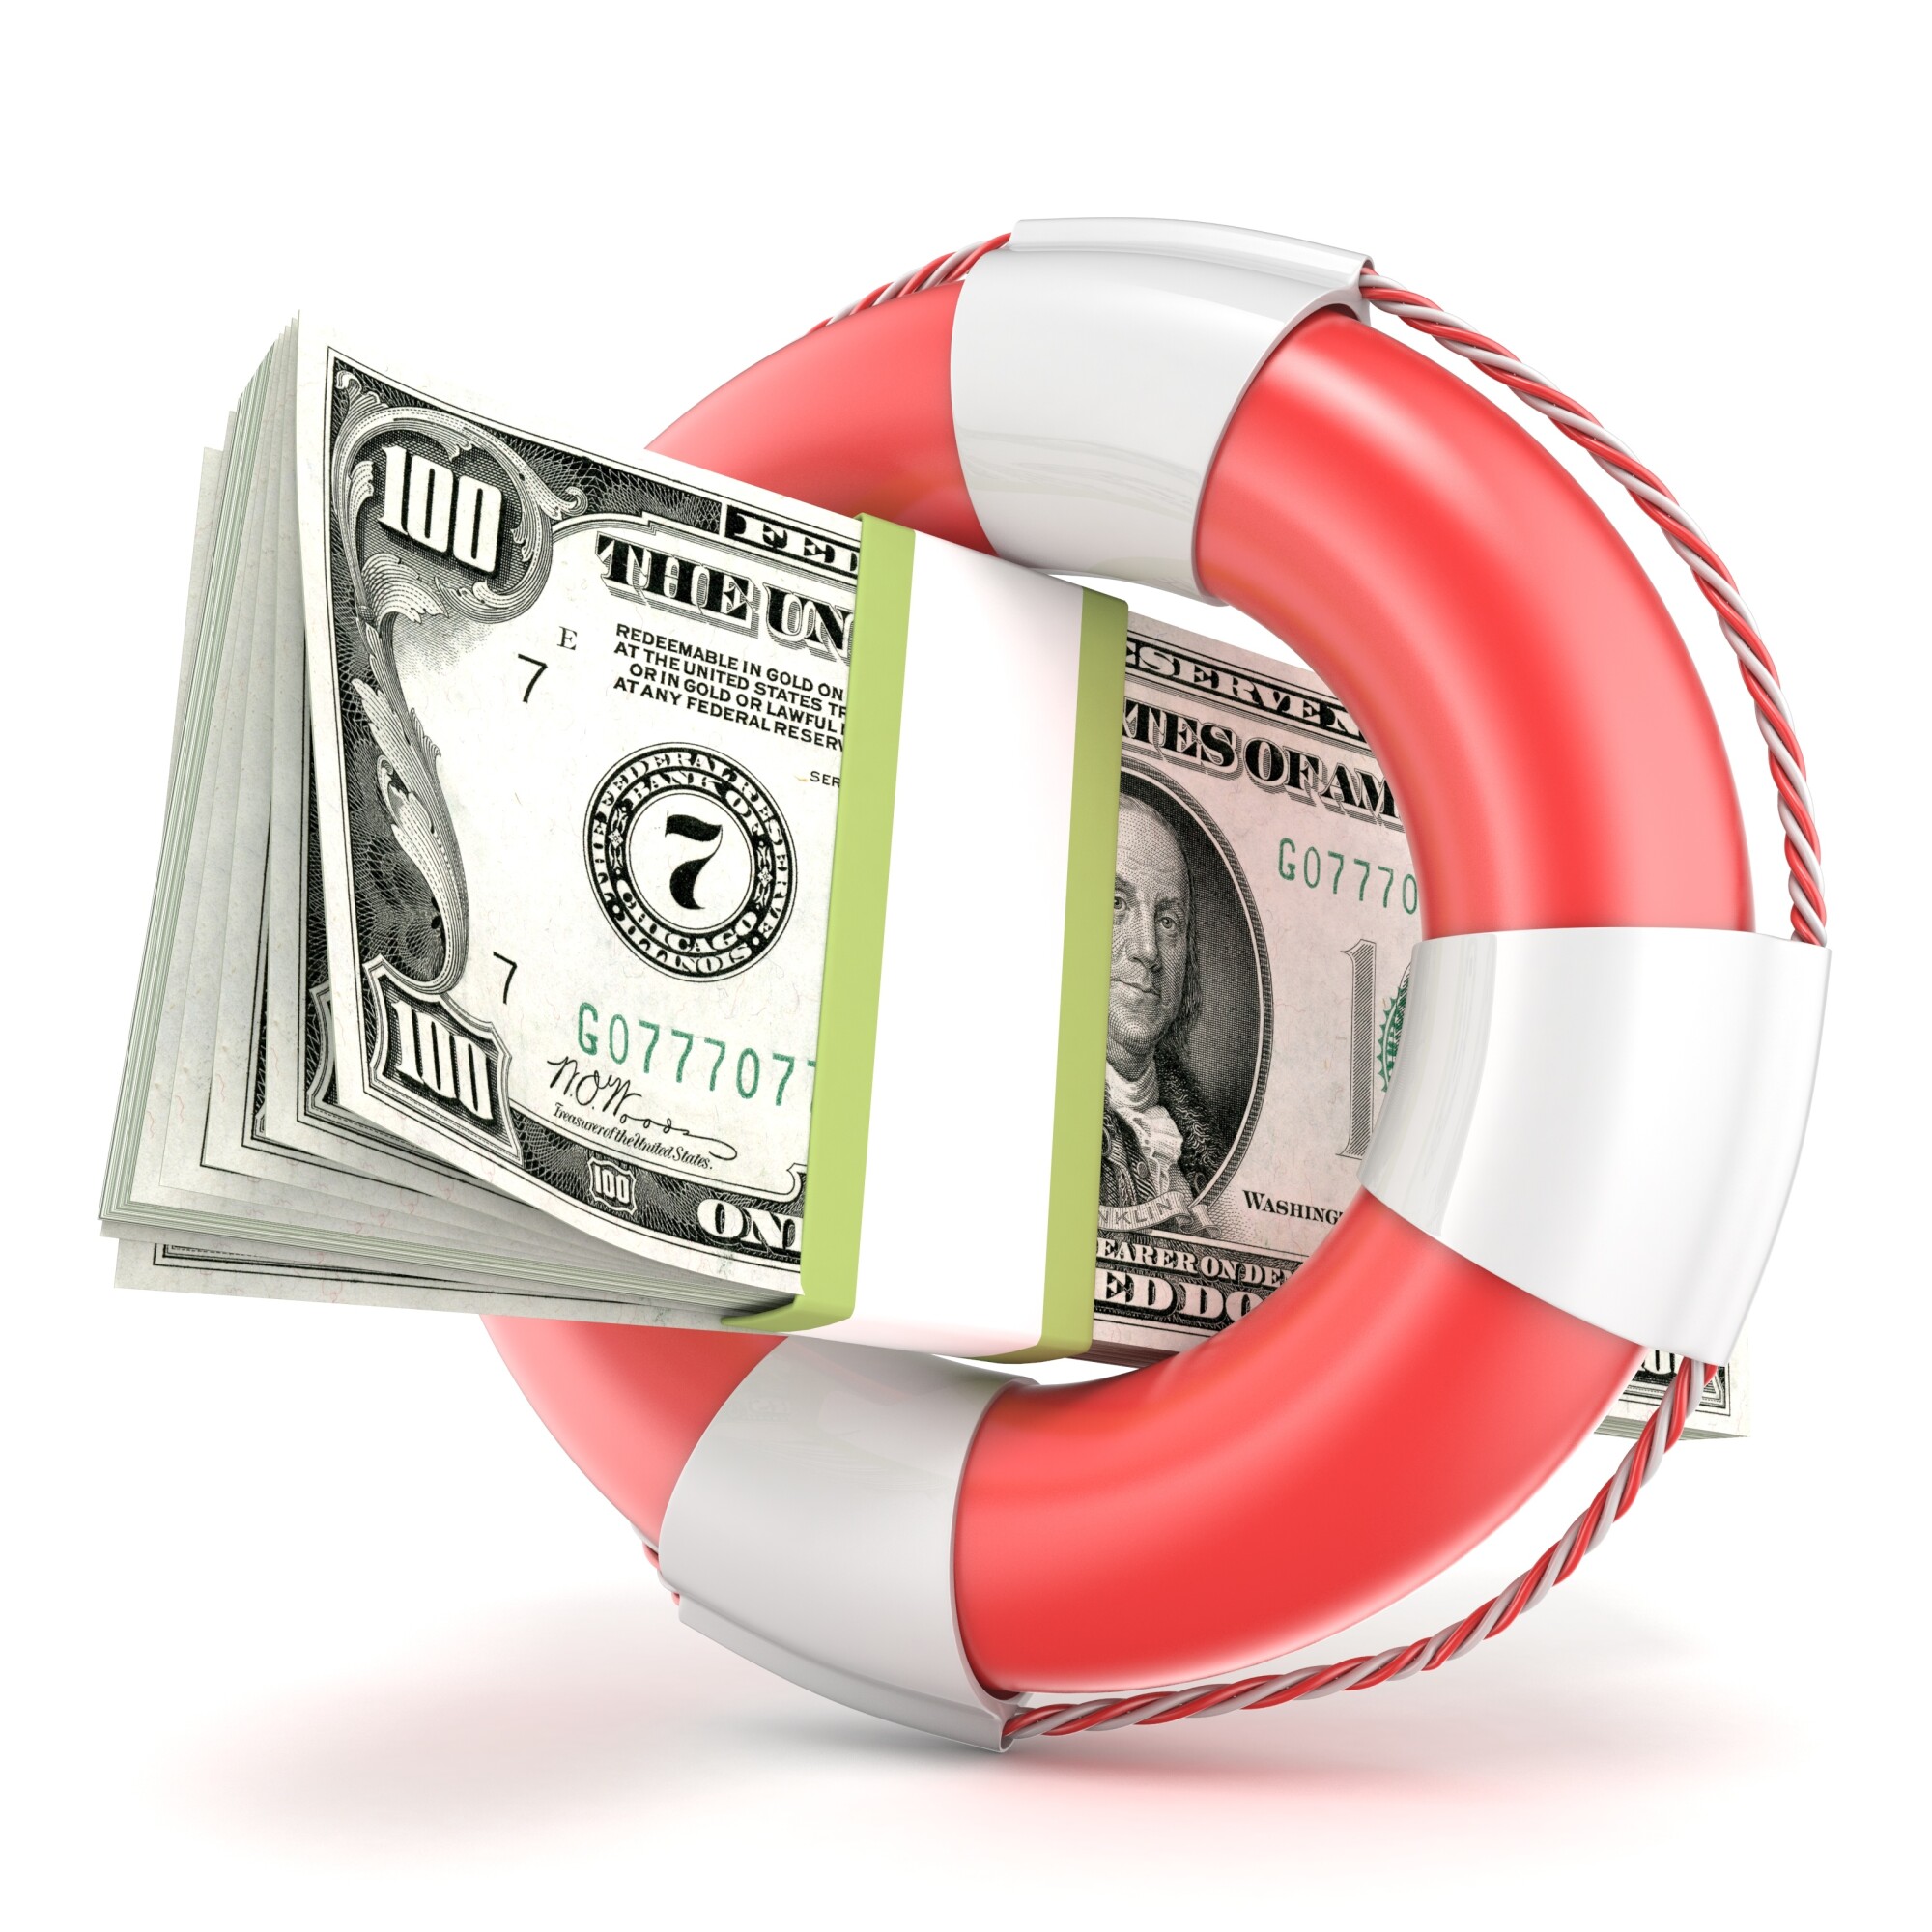 Life buoy with dollars banknote. 3D render illustration isolated on a white background